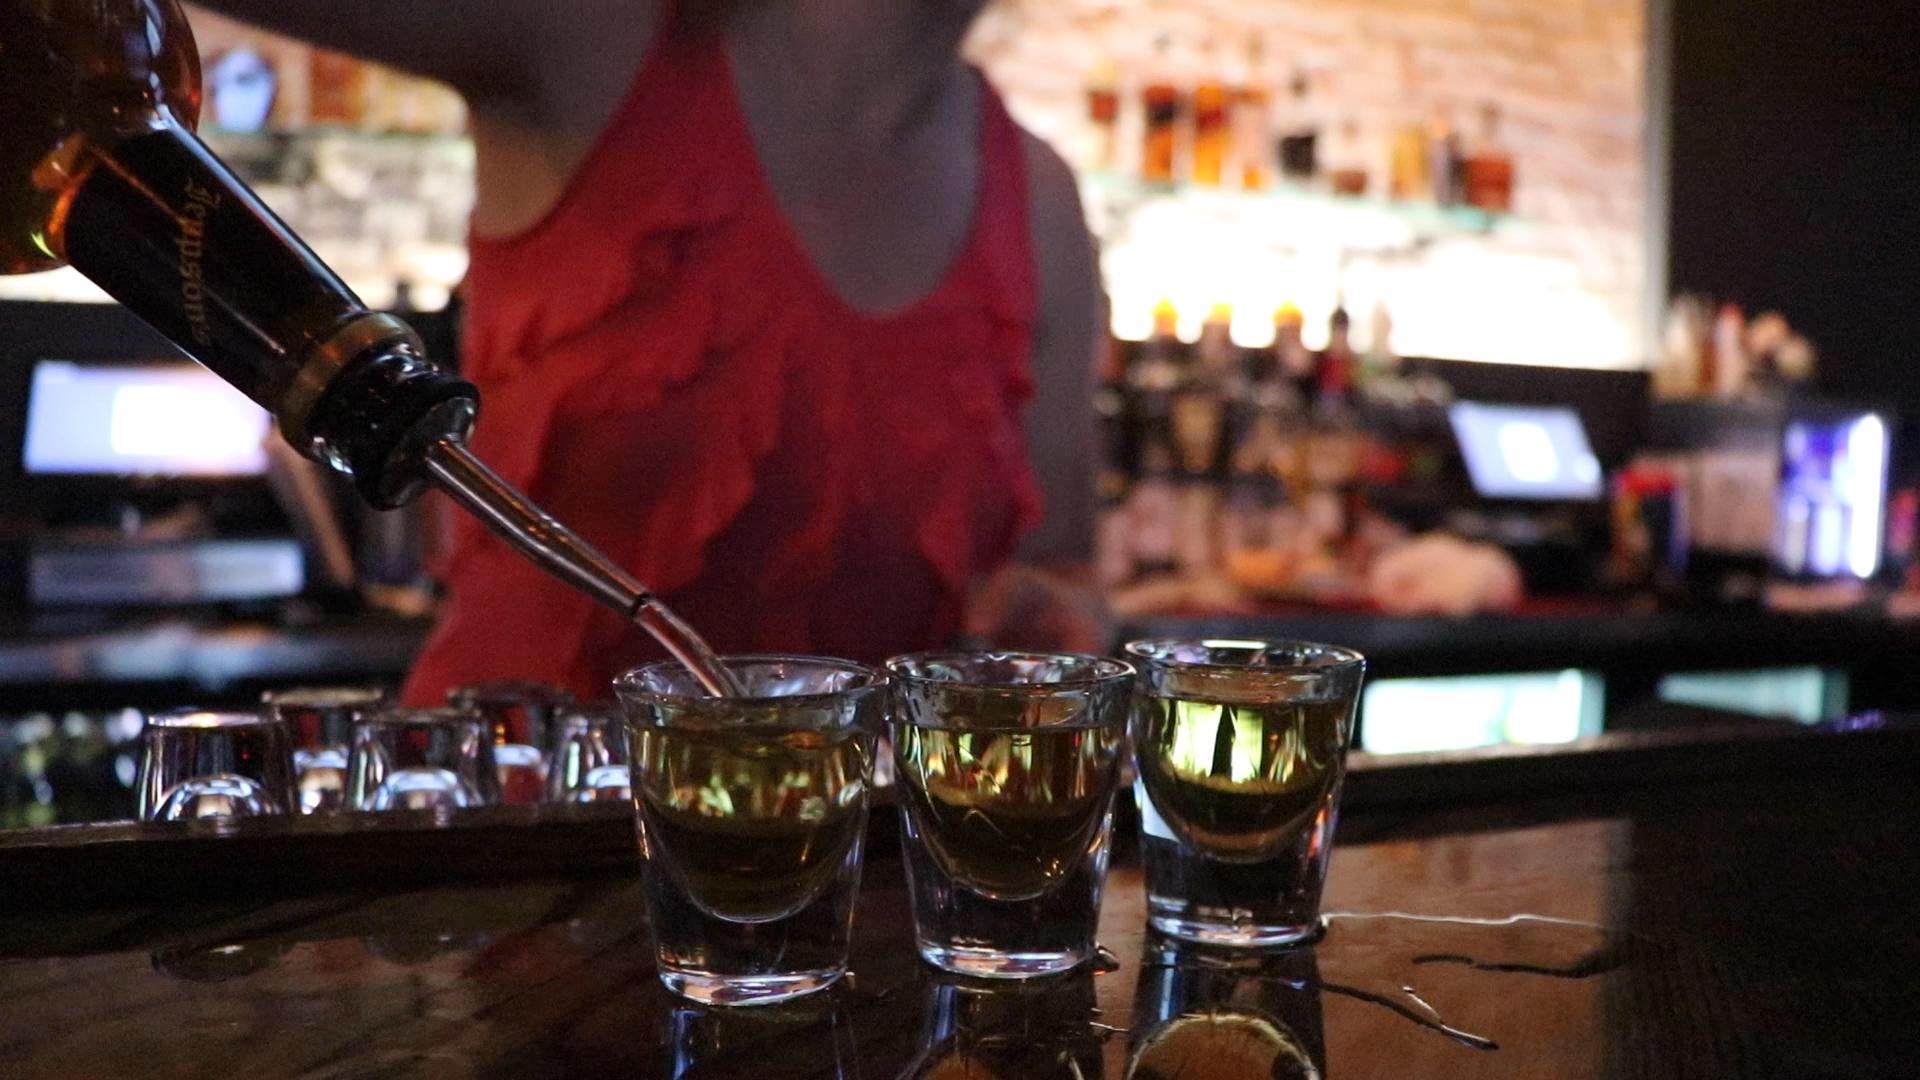 Legend has it that Malort’s inventor Carl Jeppson enjoyed the drink because its strong taste was still picked up by his taste buds, damaged from years of excessive smoking. (Evan Garcia / WTTW News)